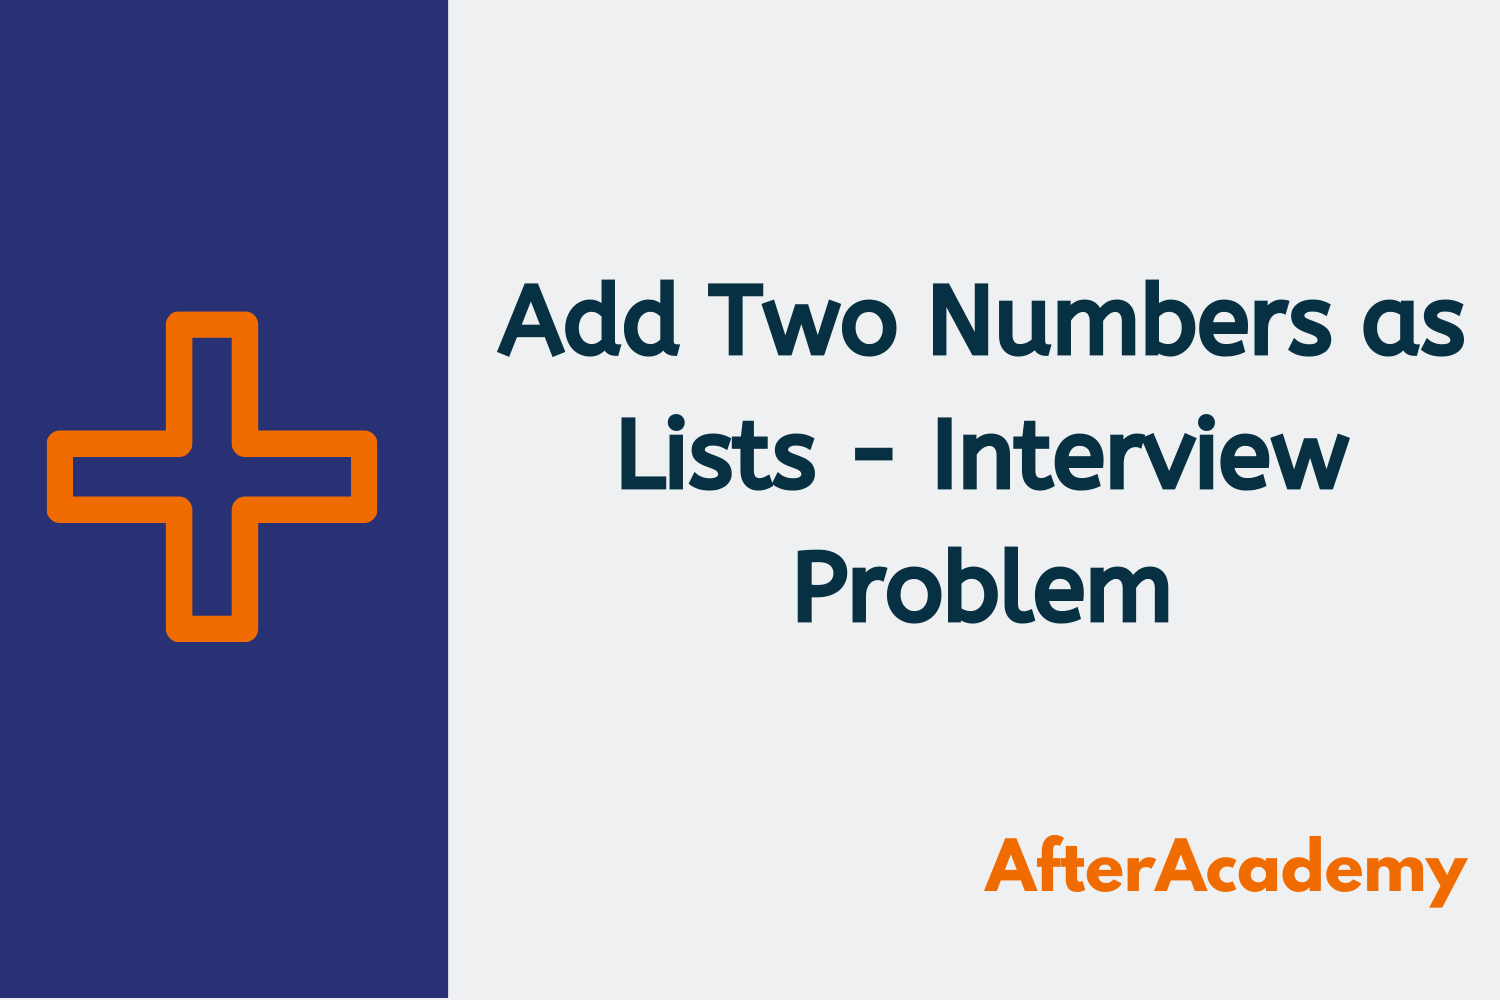 Add Two Numbers as Lists - Interview Problem